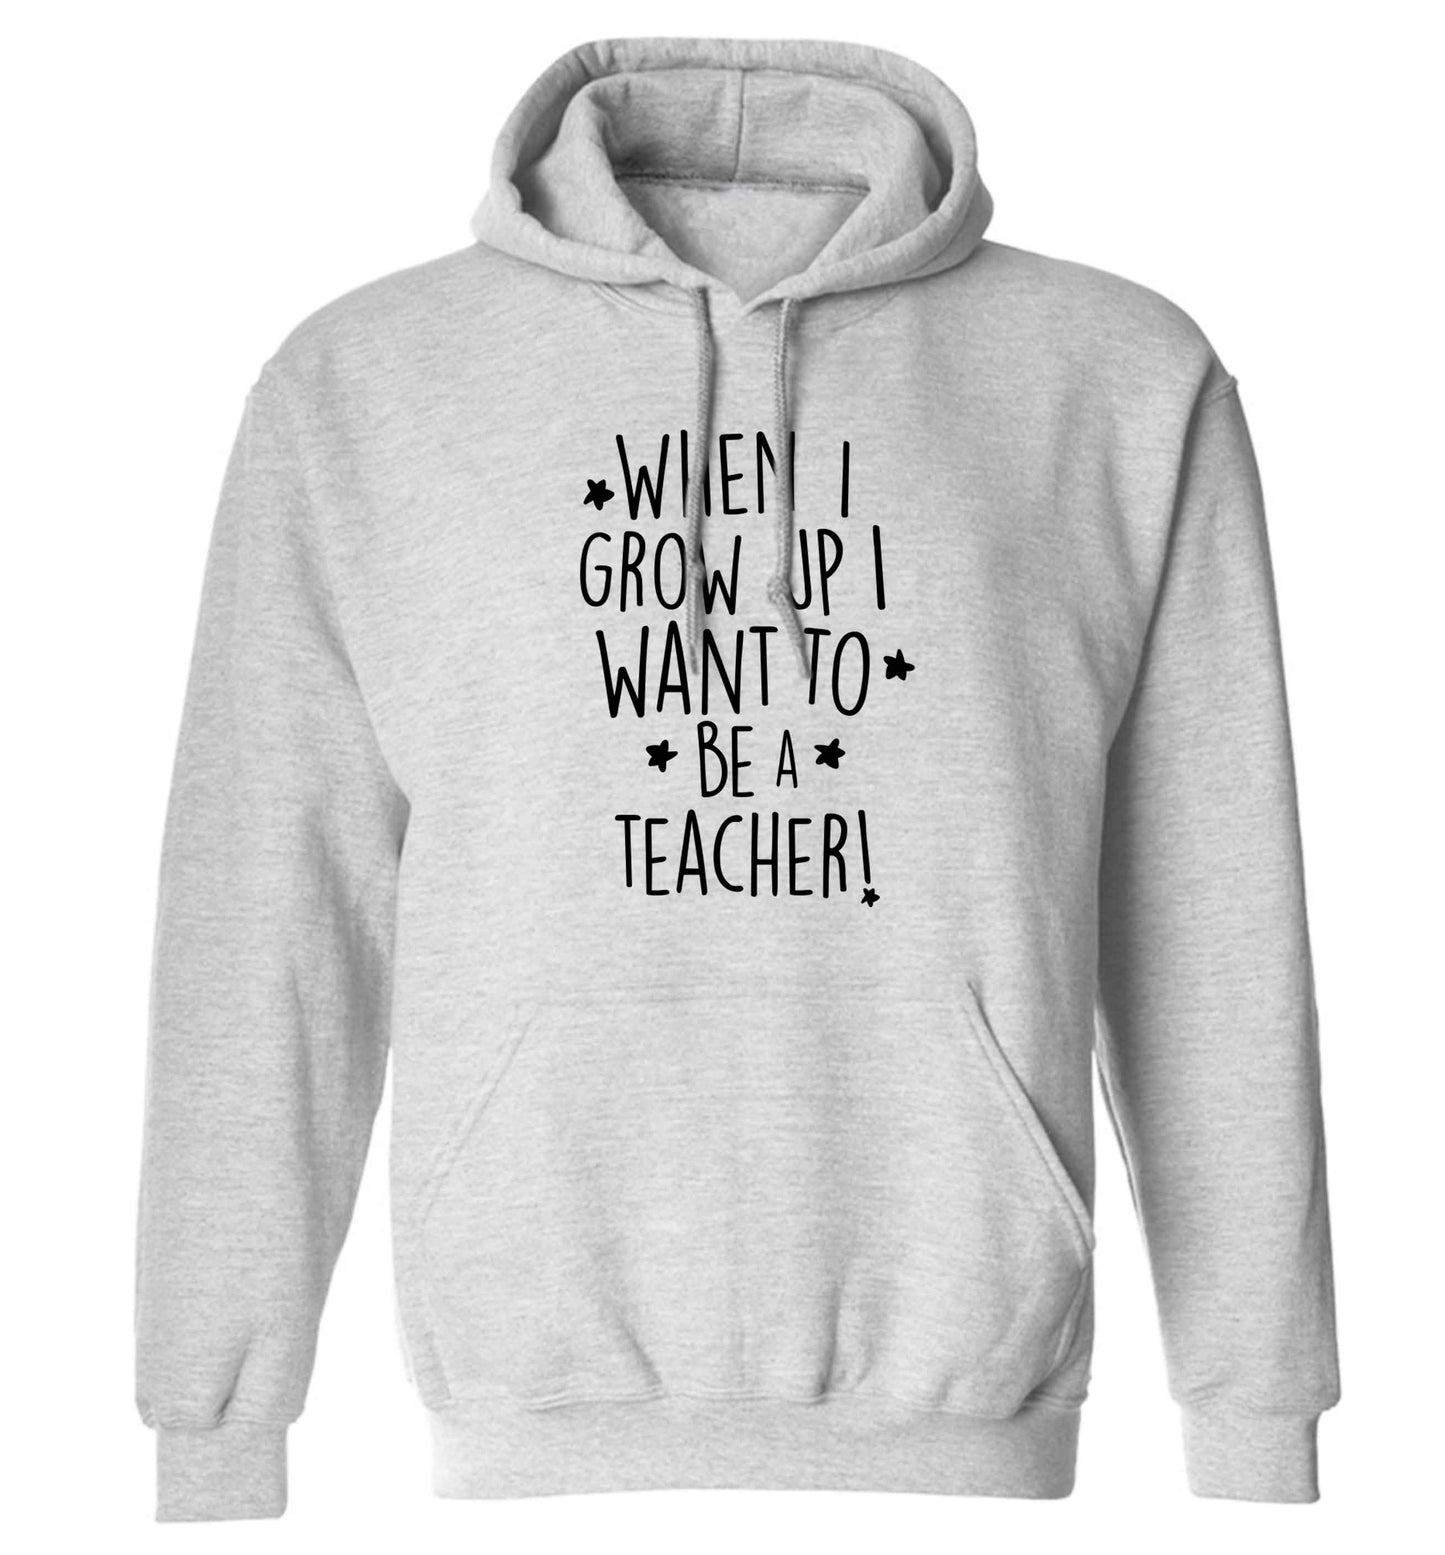 When I grow up I want to be a teacher adults unisex grey hoodie 2XL